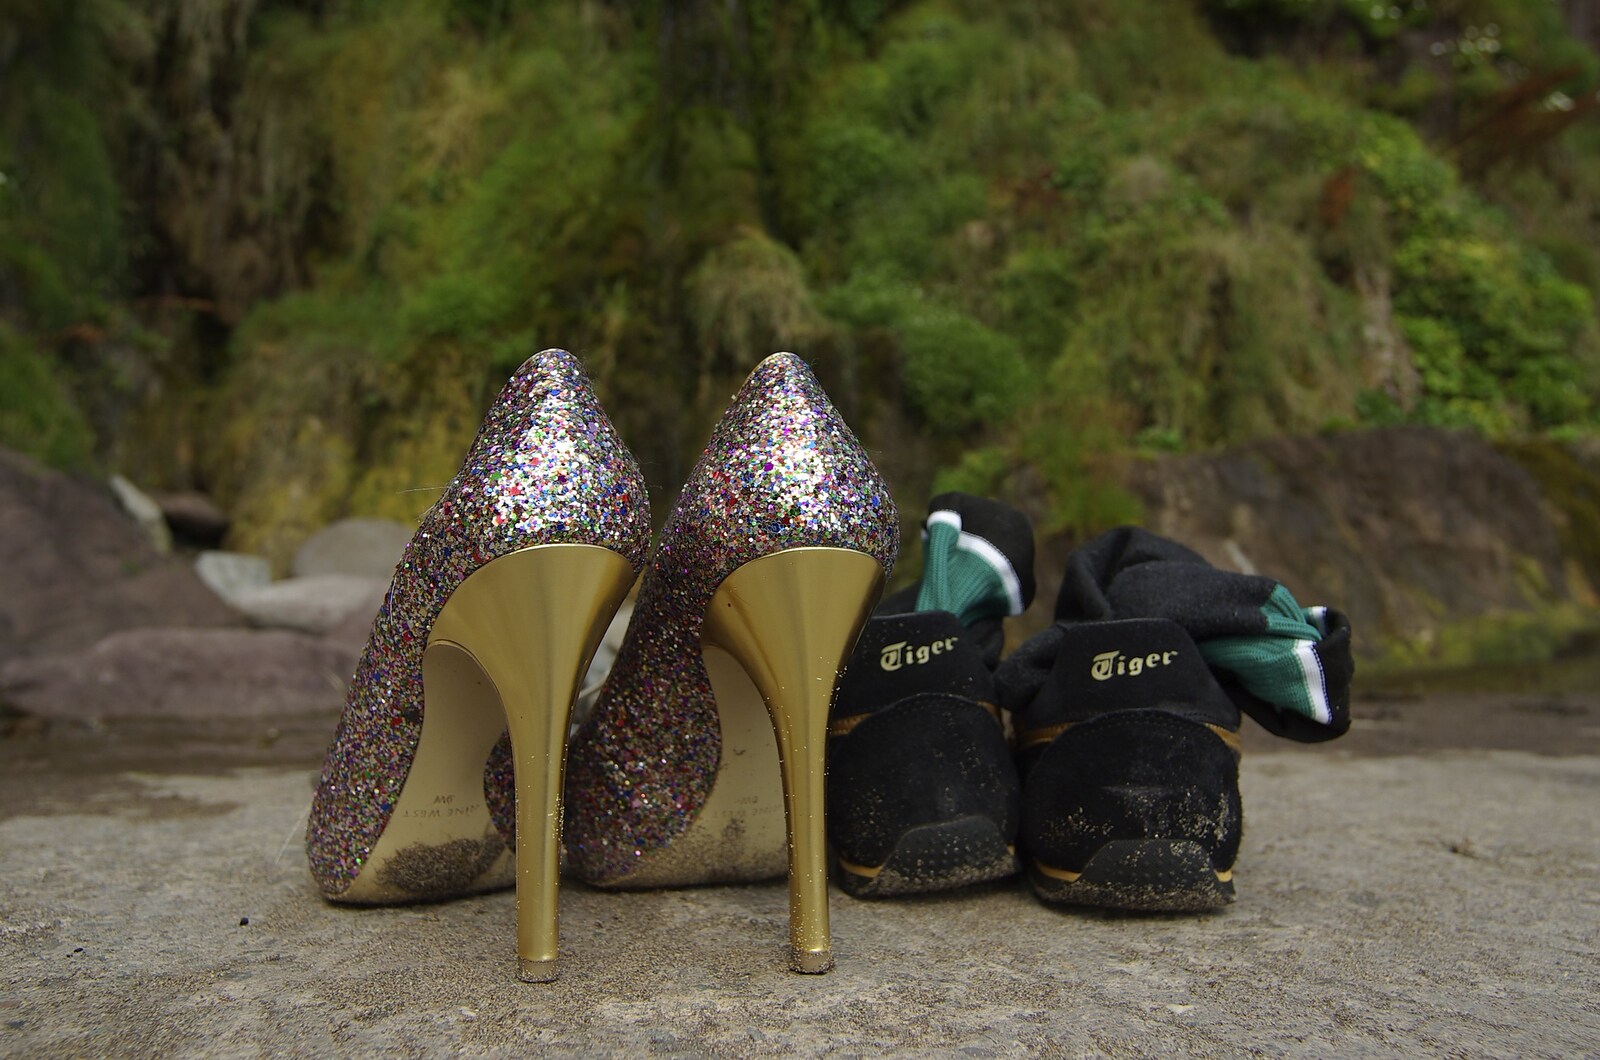 Julie's sparkly shoes and some manky trainers from Julie and Cameron's Wedding, Ballintaggart House, Dingle - 24th July 2009